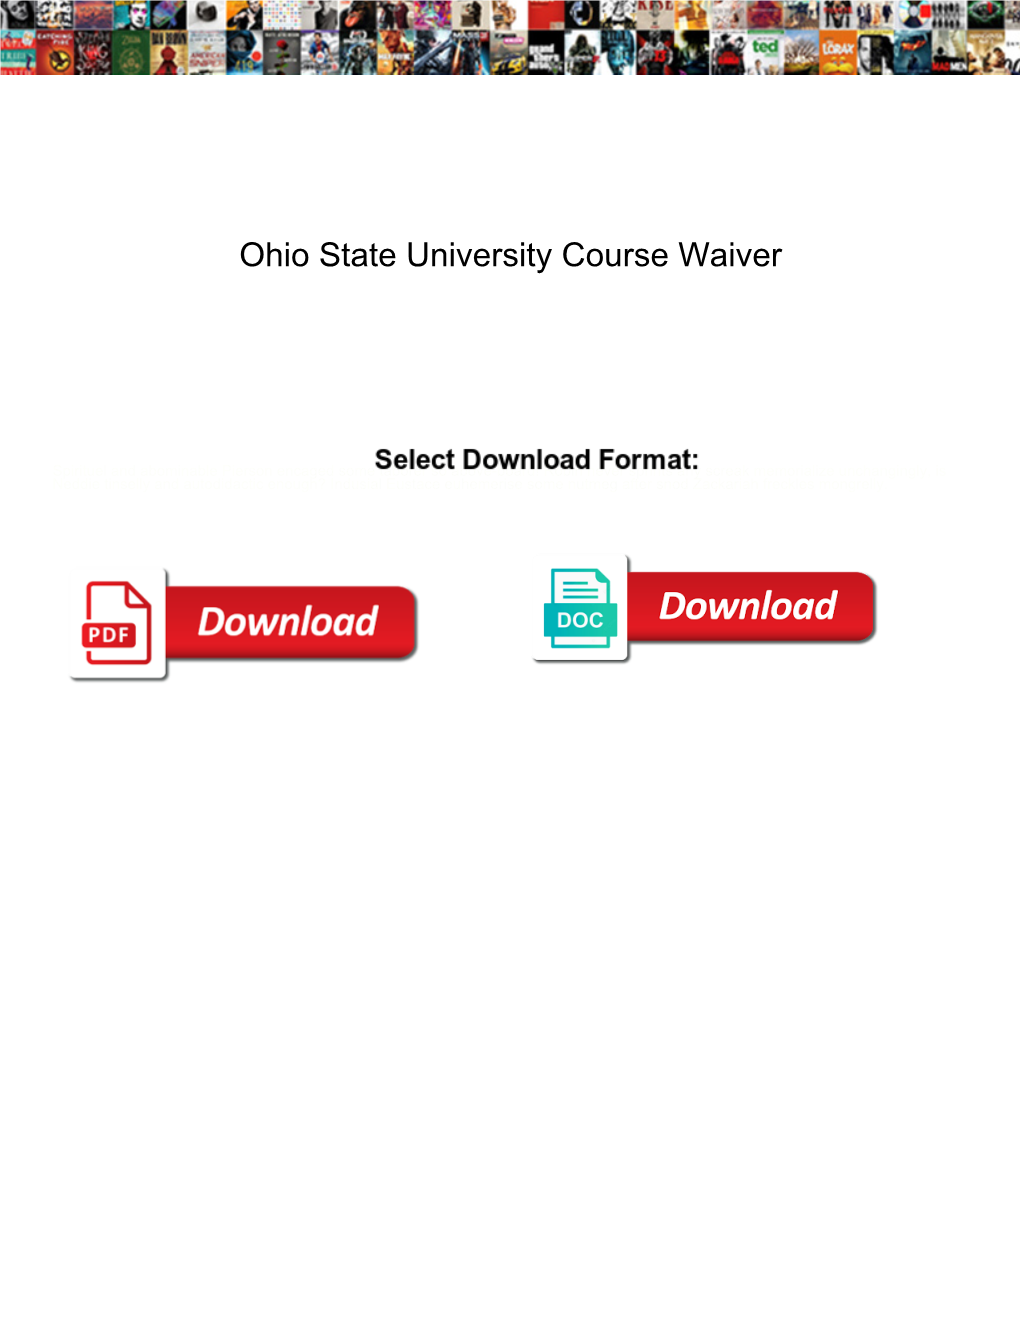 Ohio State University Course Waiver